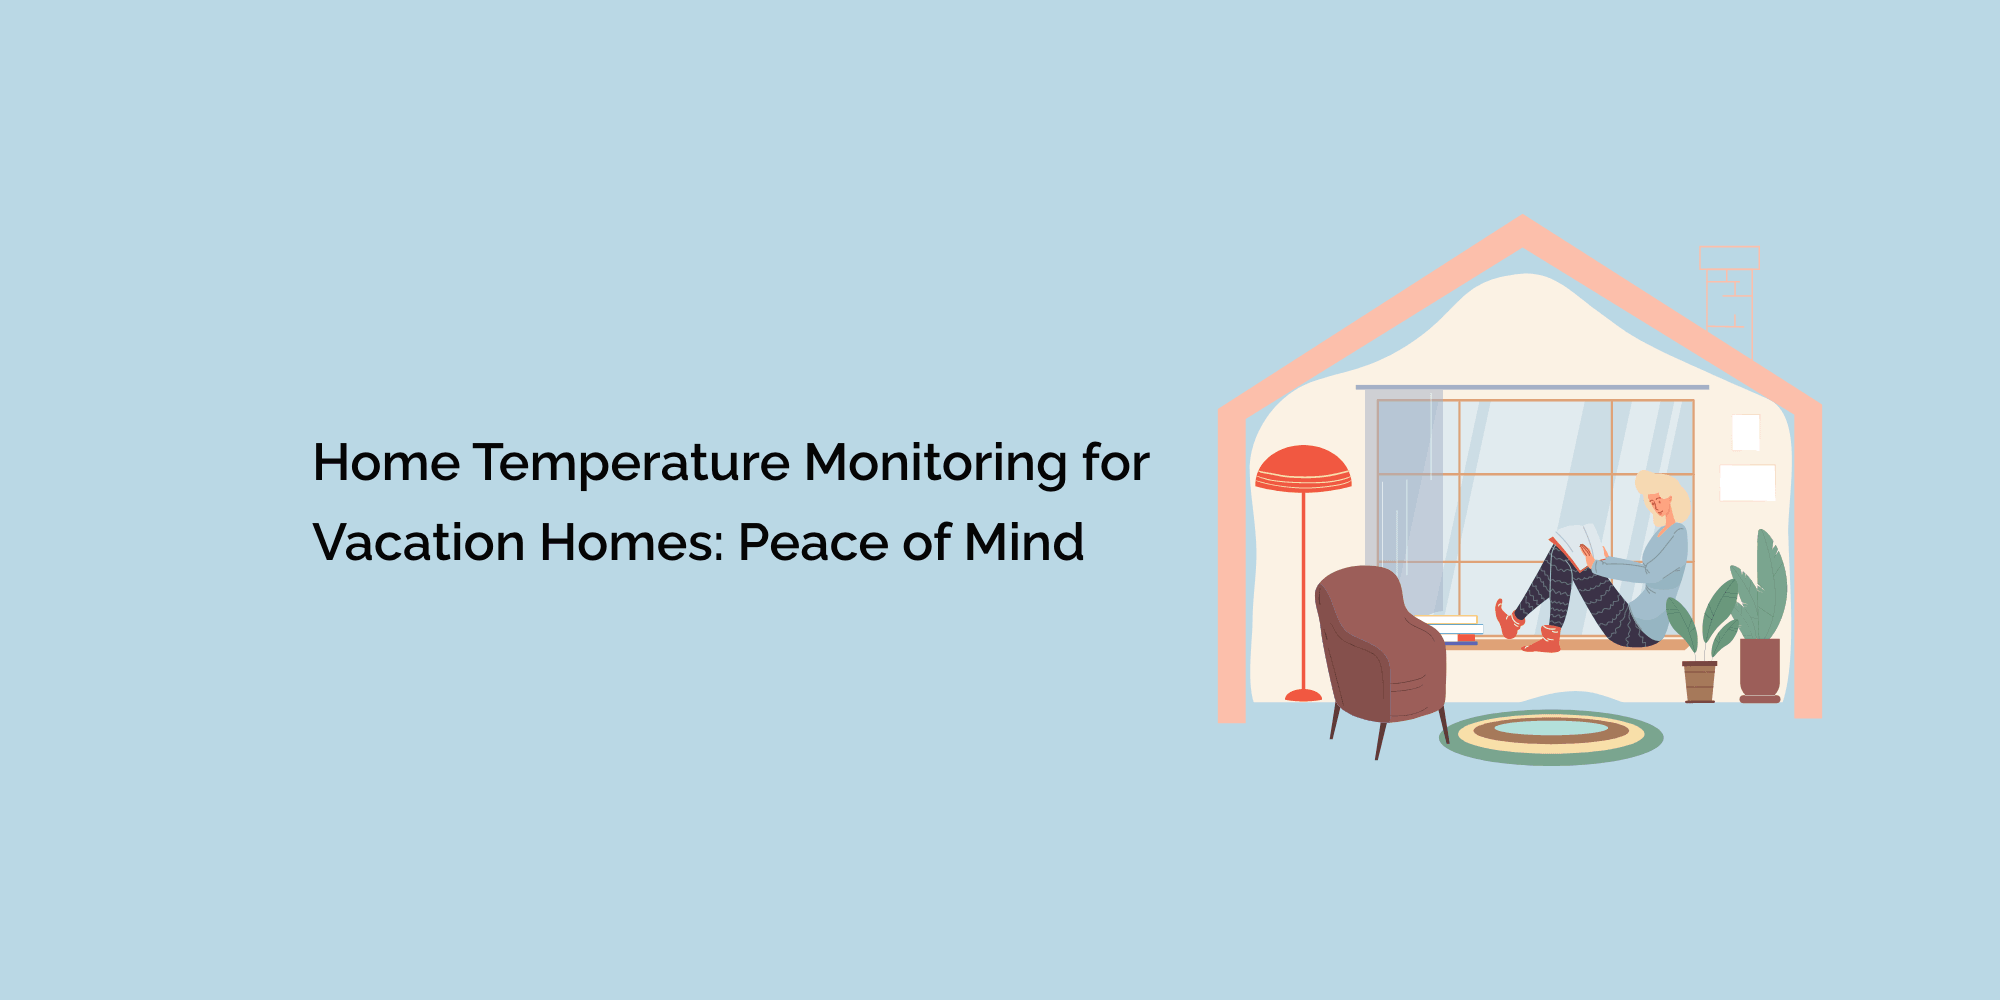 Home Temperature Monitoring for Vacation Homes: Peace of Mind